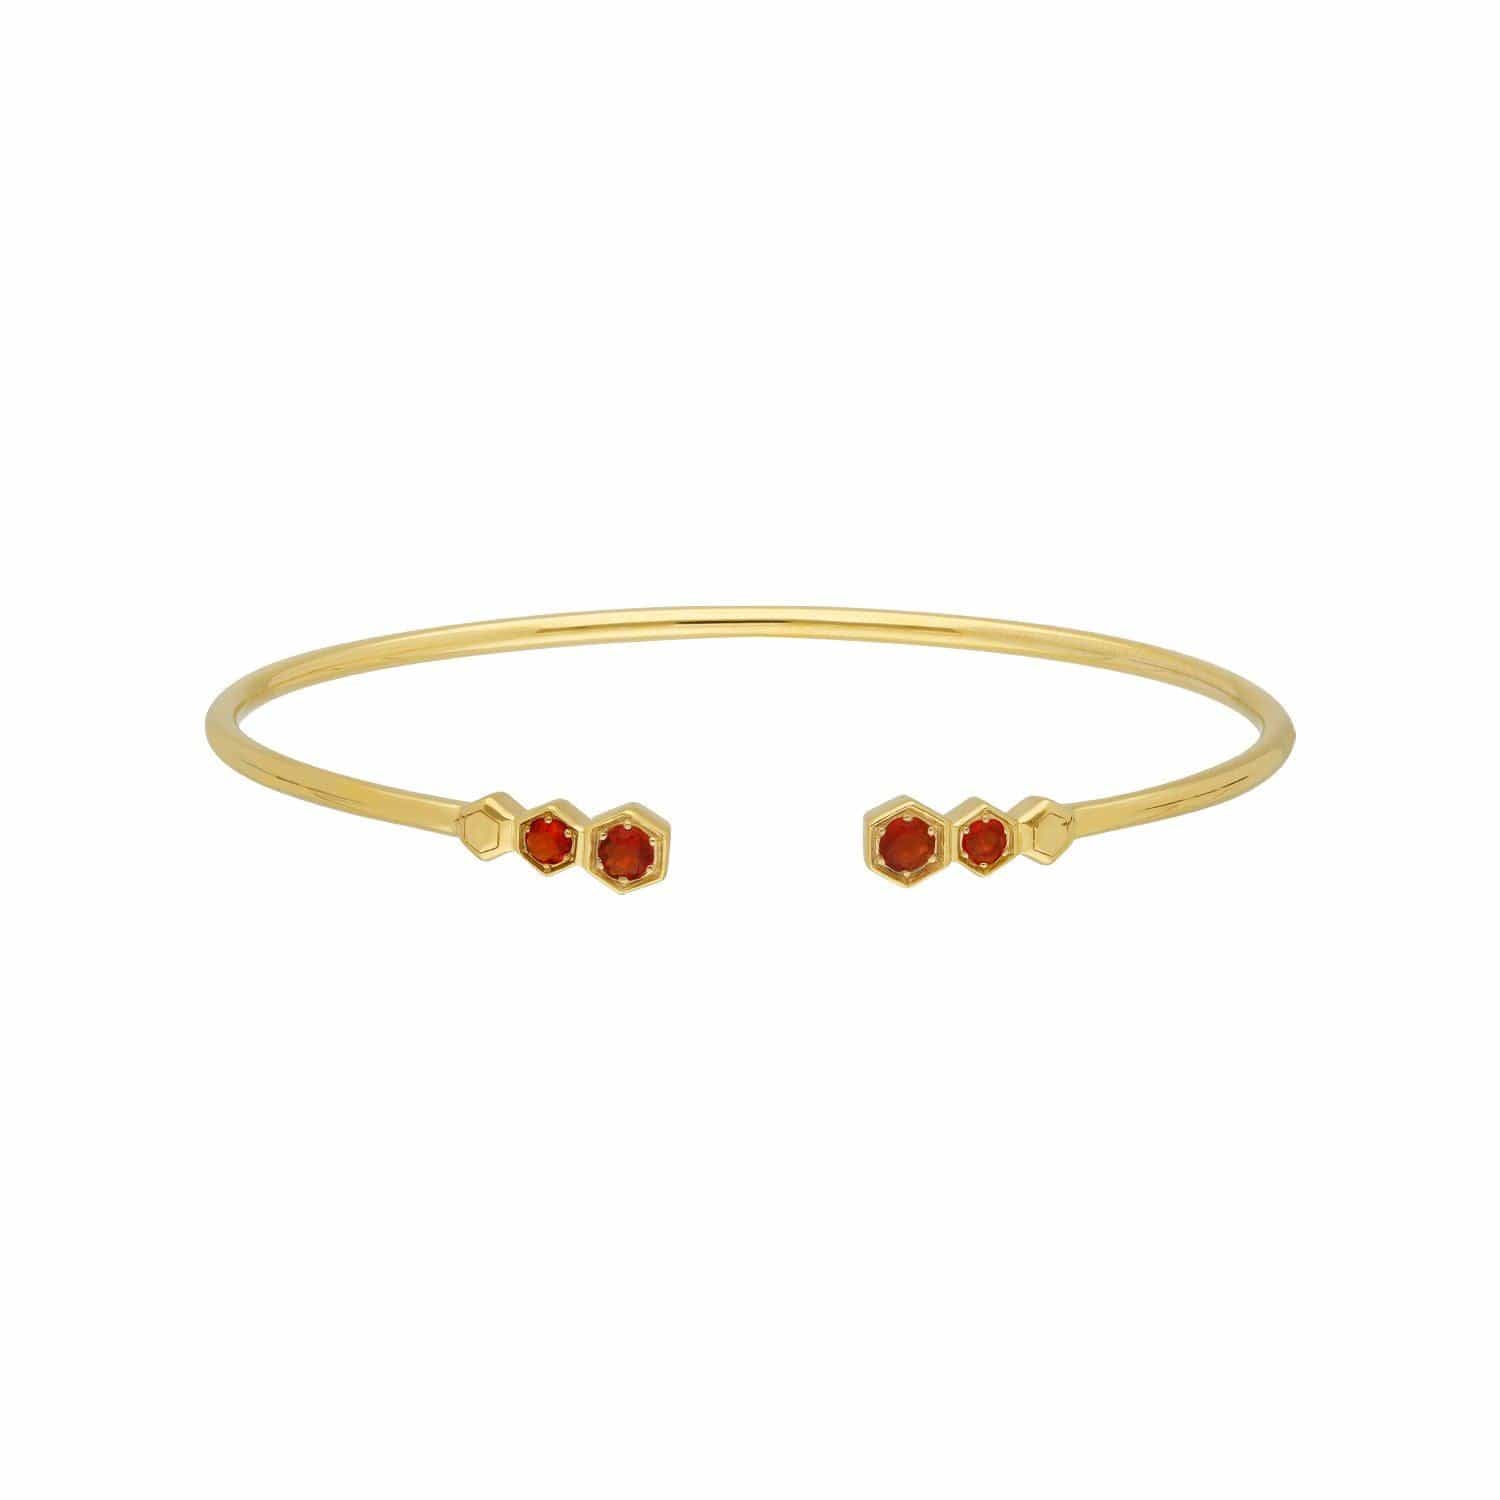 Geometric Fire Opal Open Bangle in Gold Plated 925 Sterling Silver